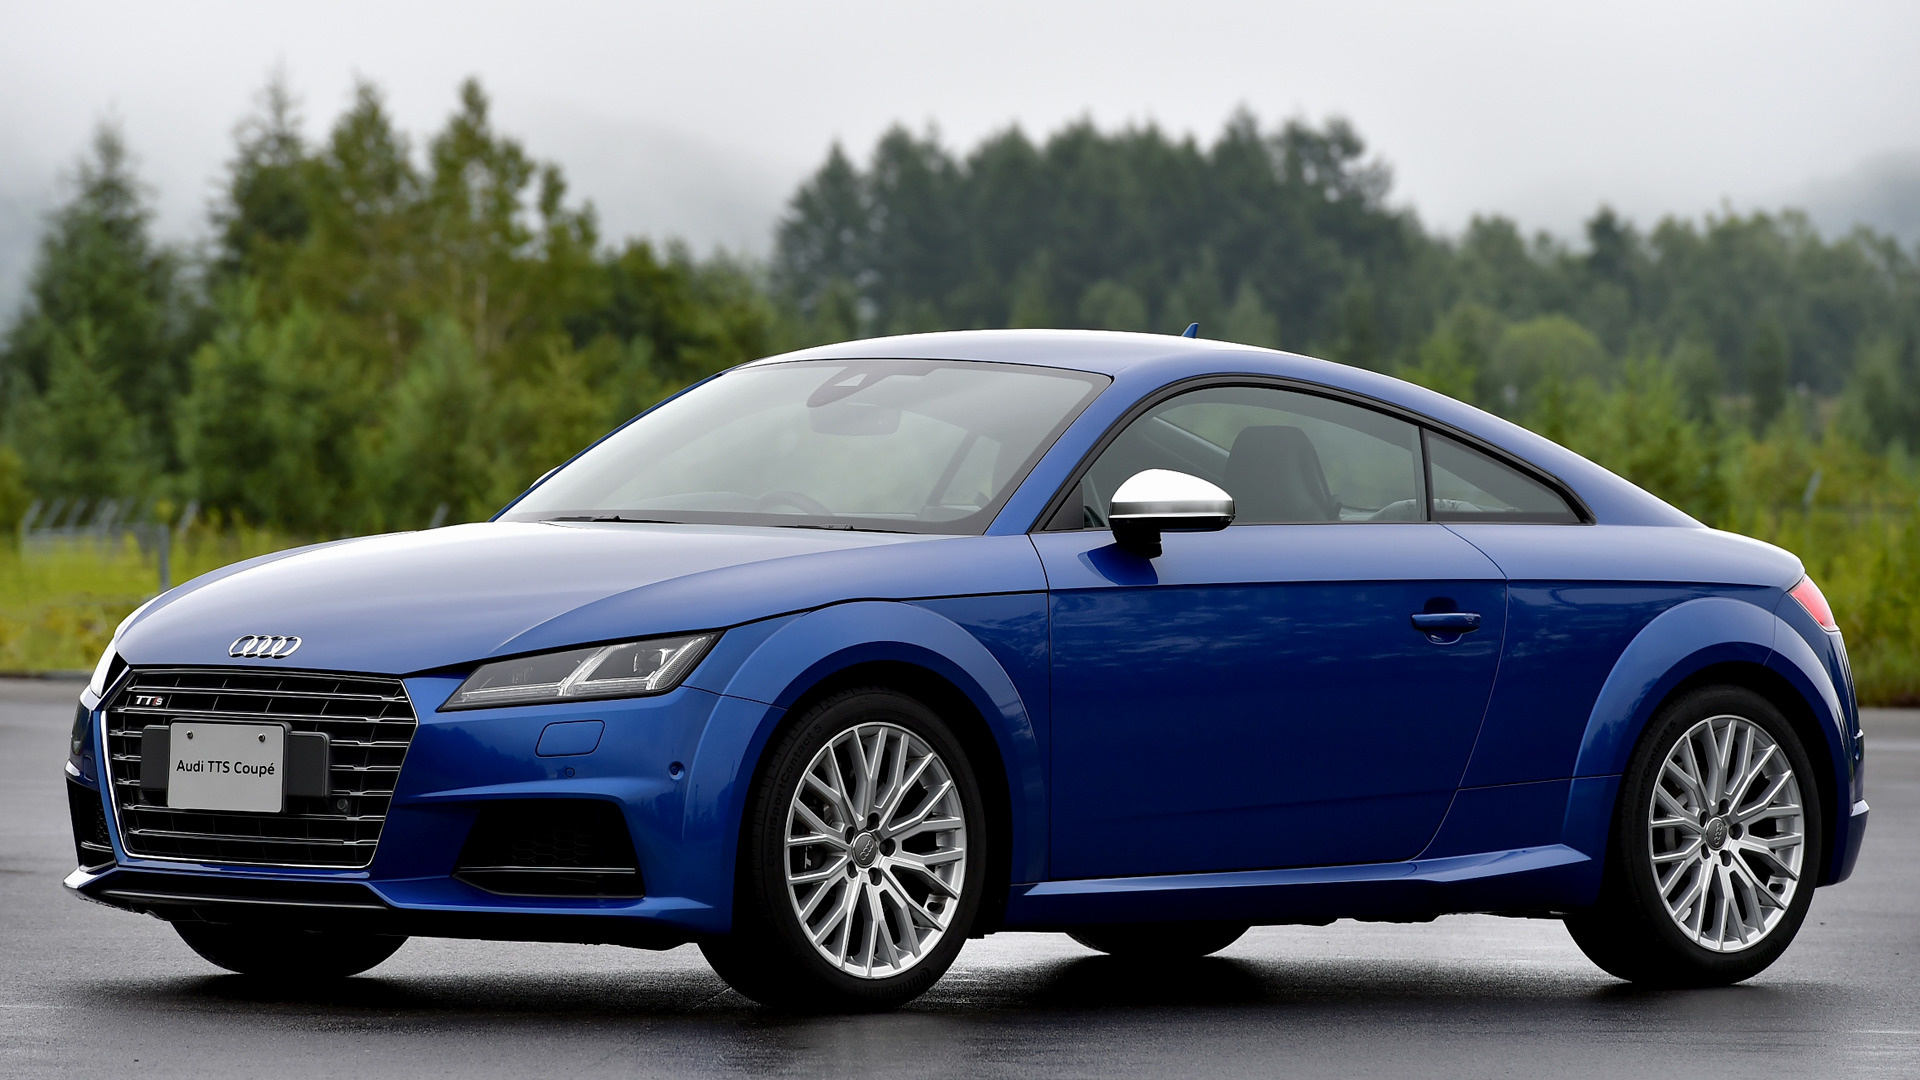 2015 Audi TTS Coupe (JP) - Wallpapers and HD Images | Car Pixel